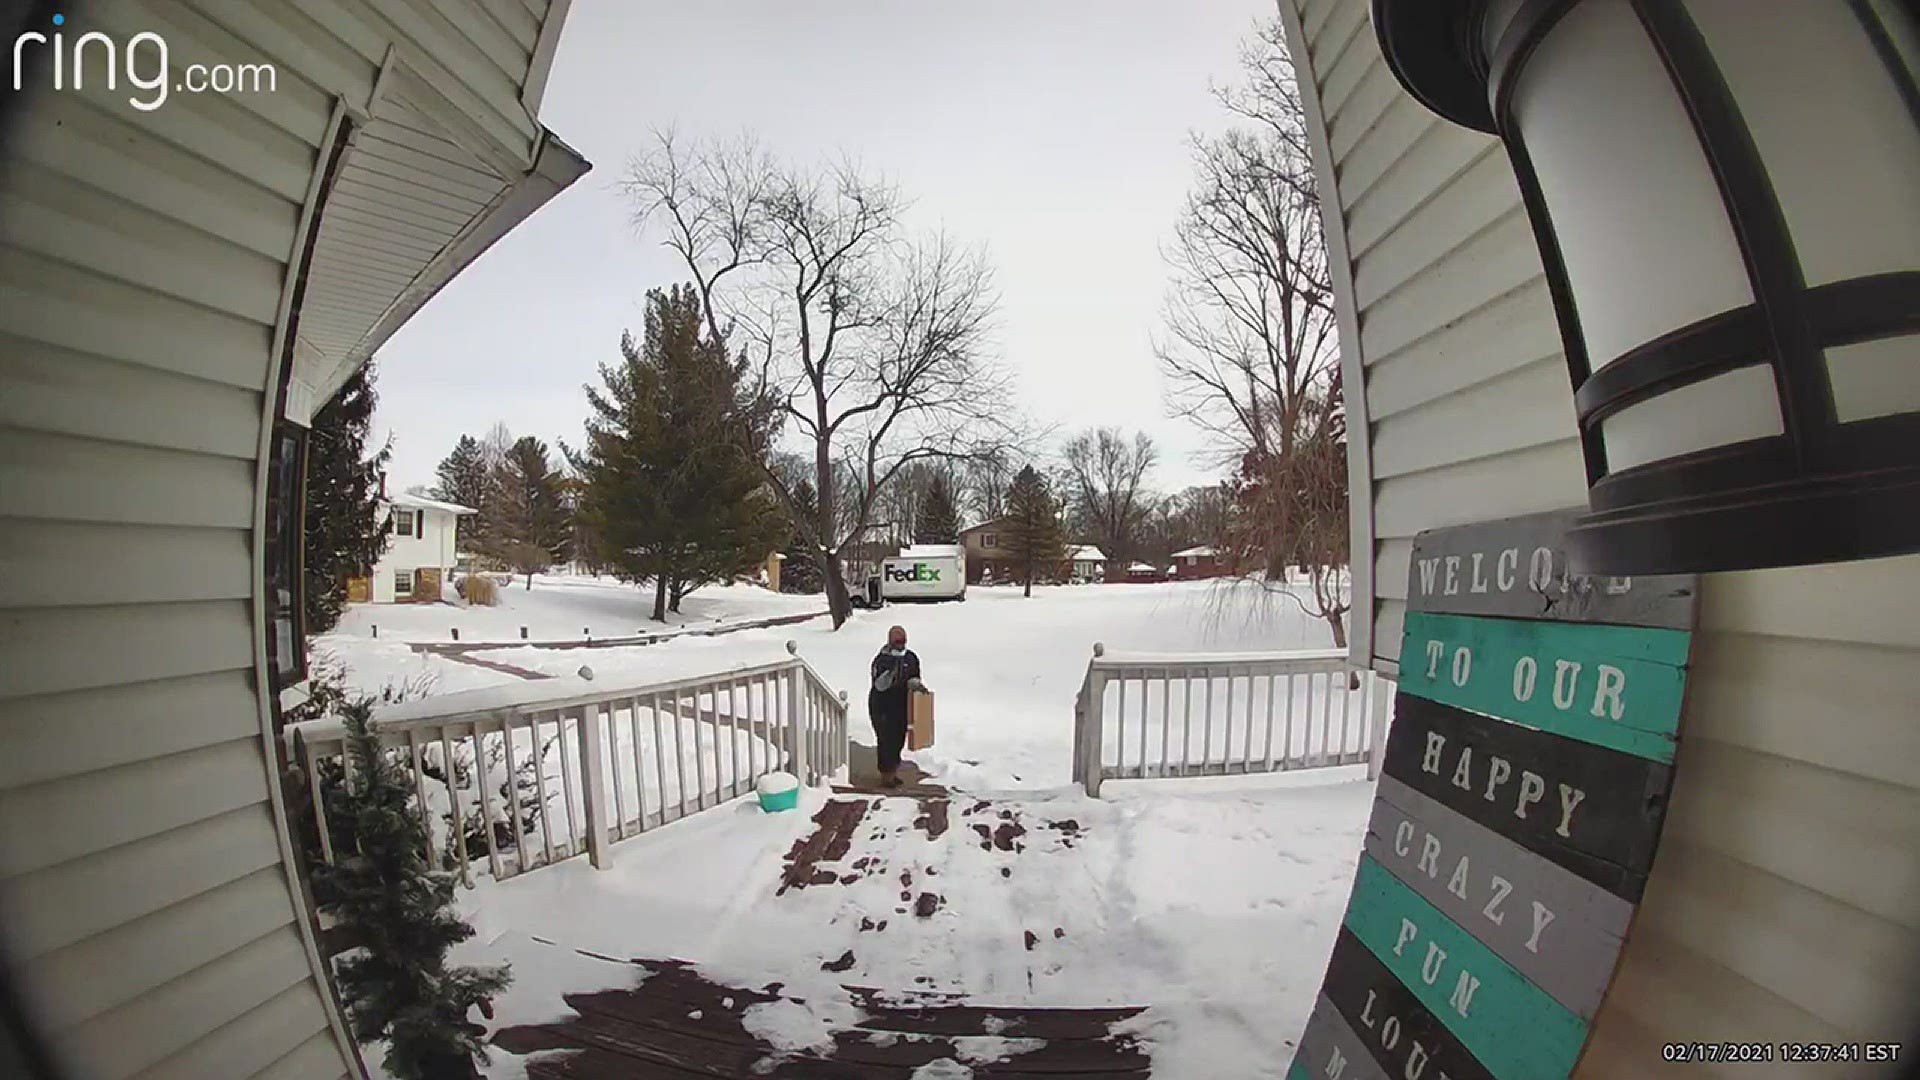 A FedEx driver was caught on camera dancing during a delivery.